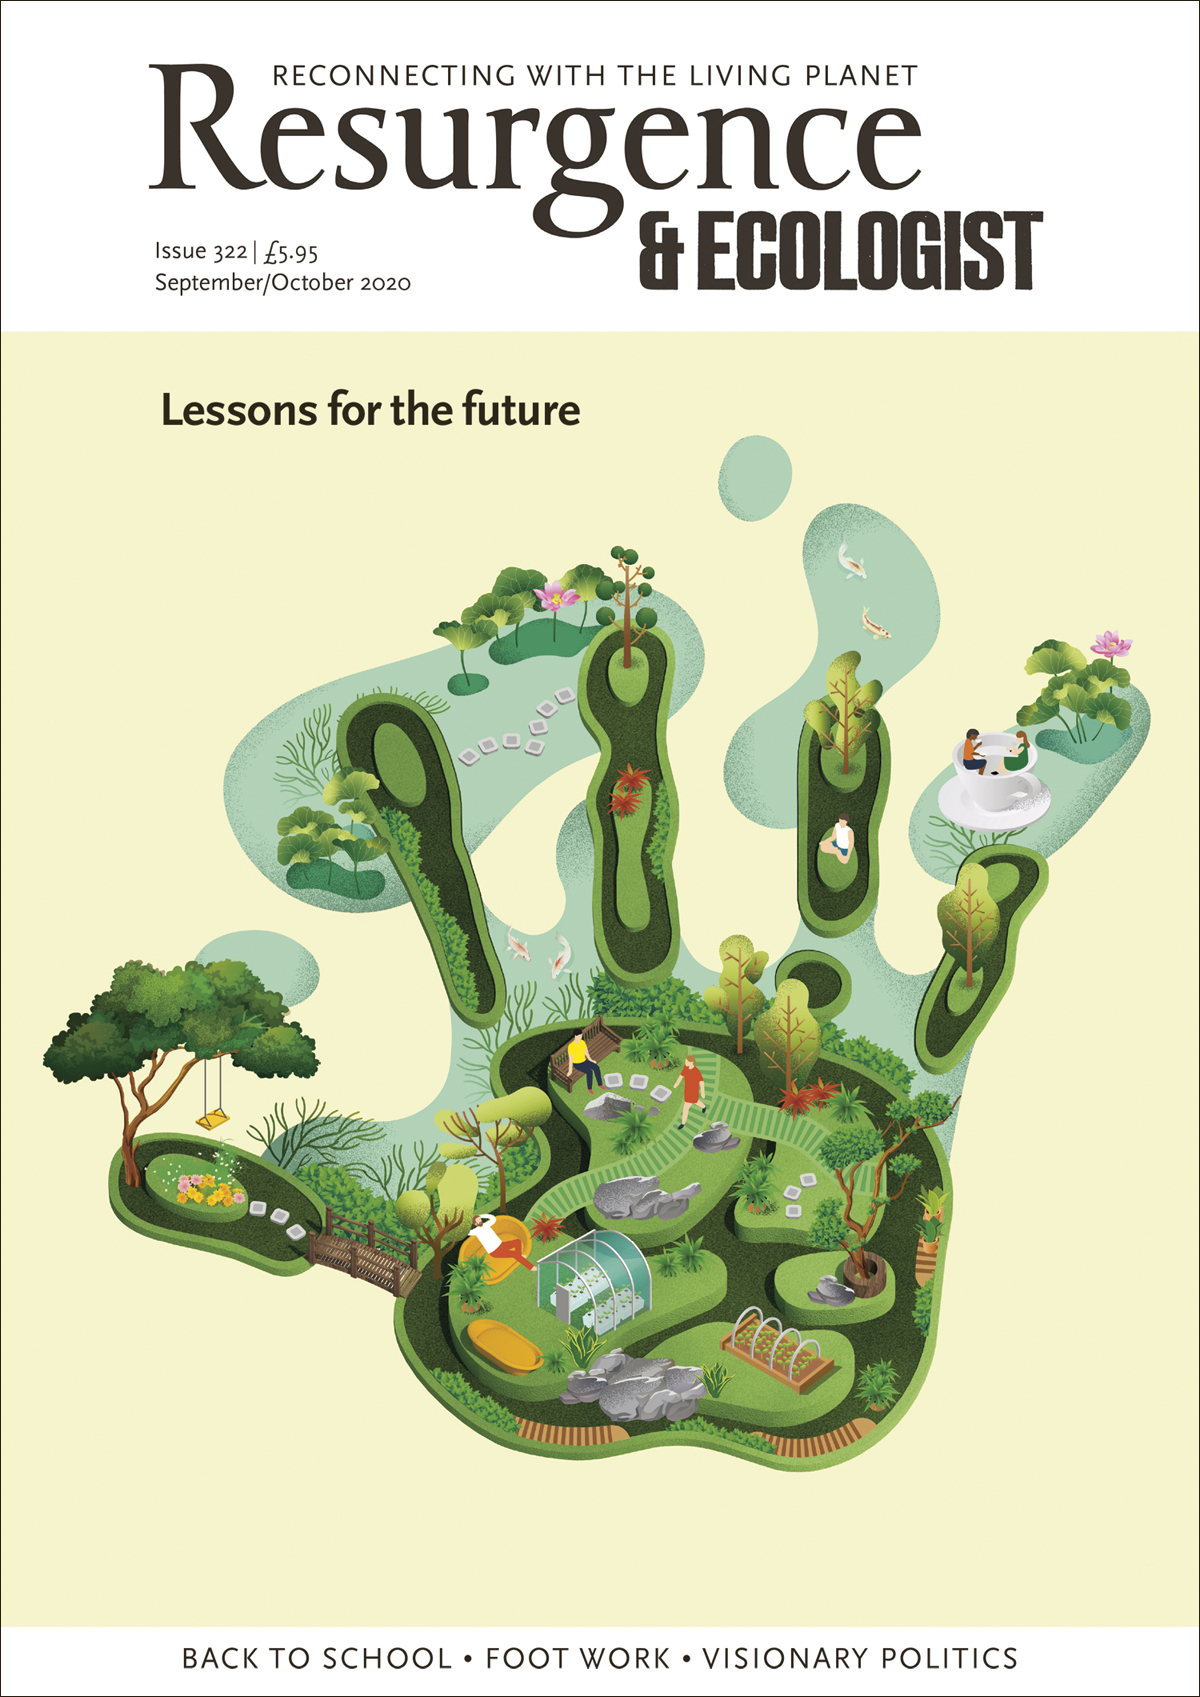 Read the latest issue of Resurgence & Ecologist